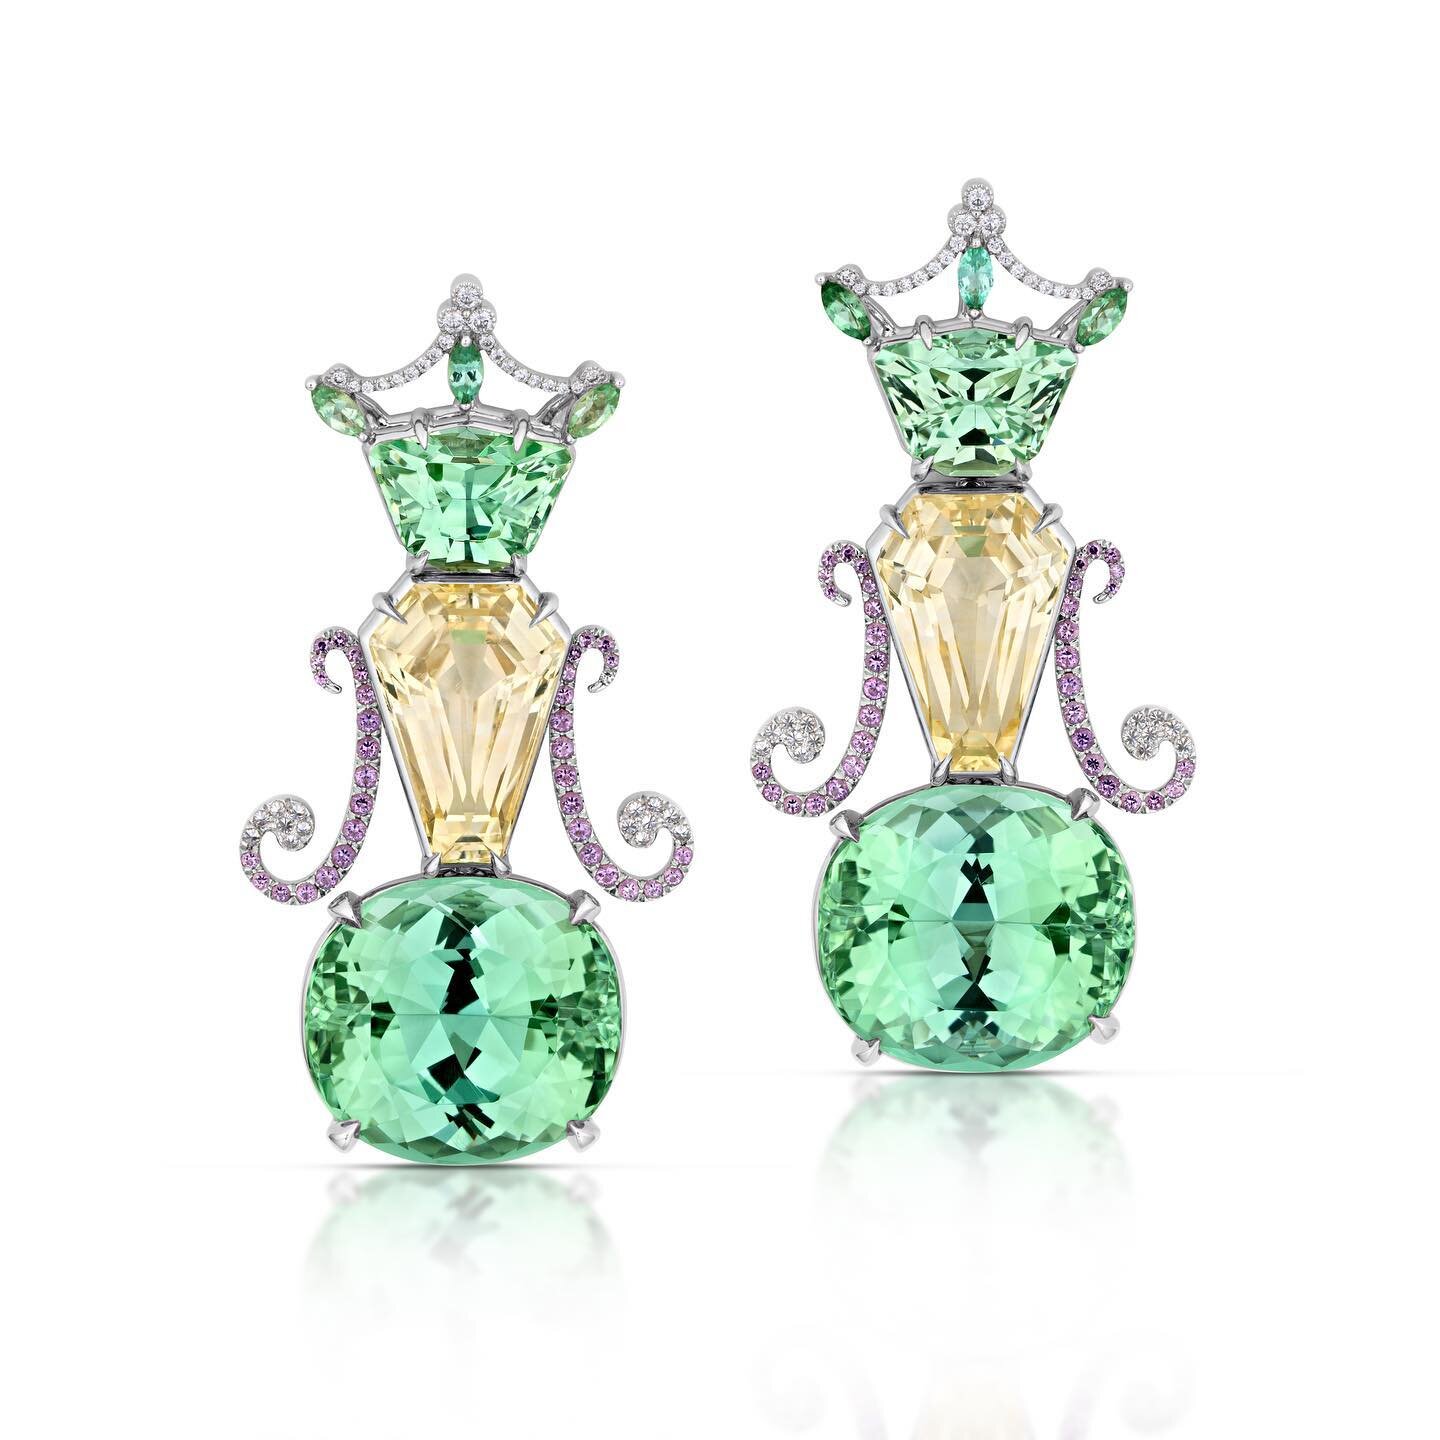 We&rsquo;re delighted to announce our QEII earrings received the Best Use of Color Award from AGTA Spectrum Awards 2022.  What an amazing honor!🏆🎉
 
These earrings are fit for a queen and pay tribute to Queen Elizabeth the longest reigning British 